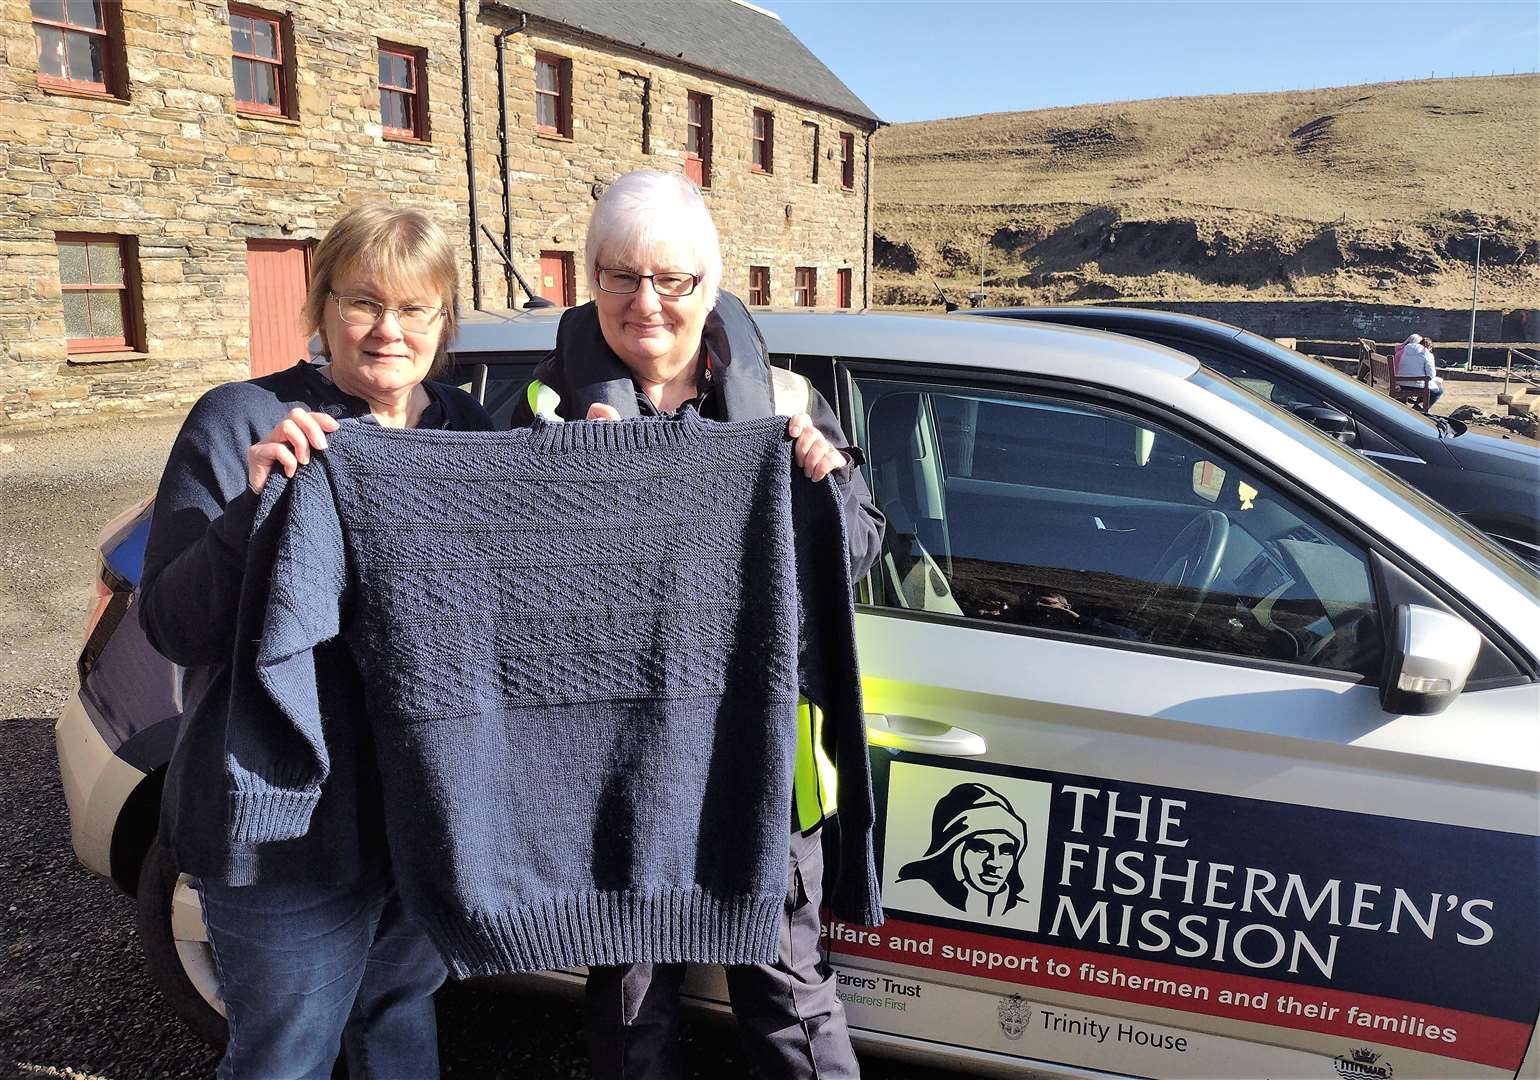 Marcella MacDonald from Lybster, at left with Jackie Dodds from the Fishermen's Mission. Marcella won the gansey jumper and her husband Frankie, a former fisherman, will now wear it.